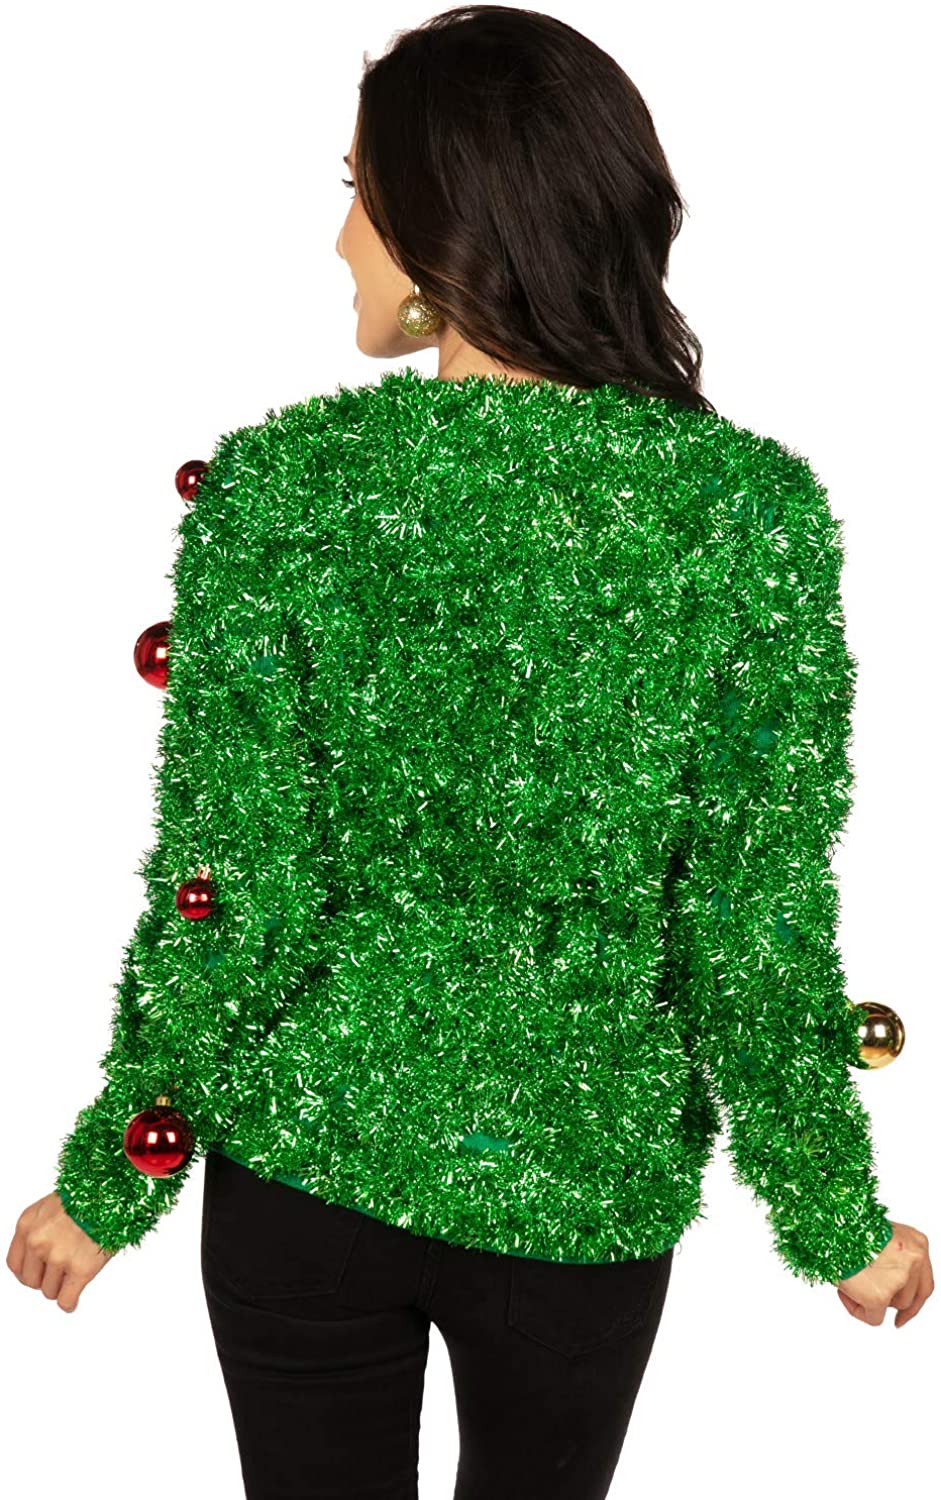 Women's Gaudy Garland Cardigan - Tacky Christmas Sweater with Ornaments ...